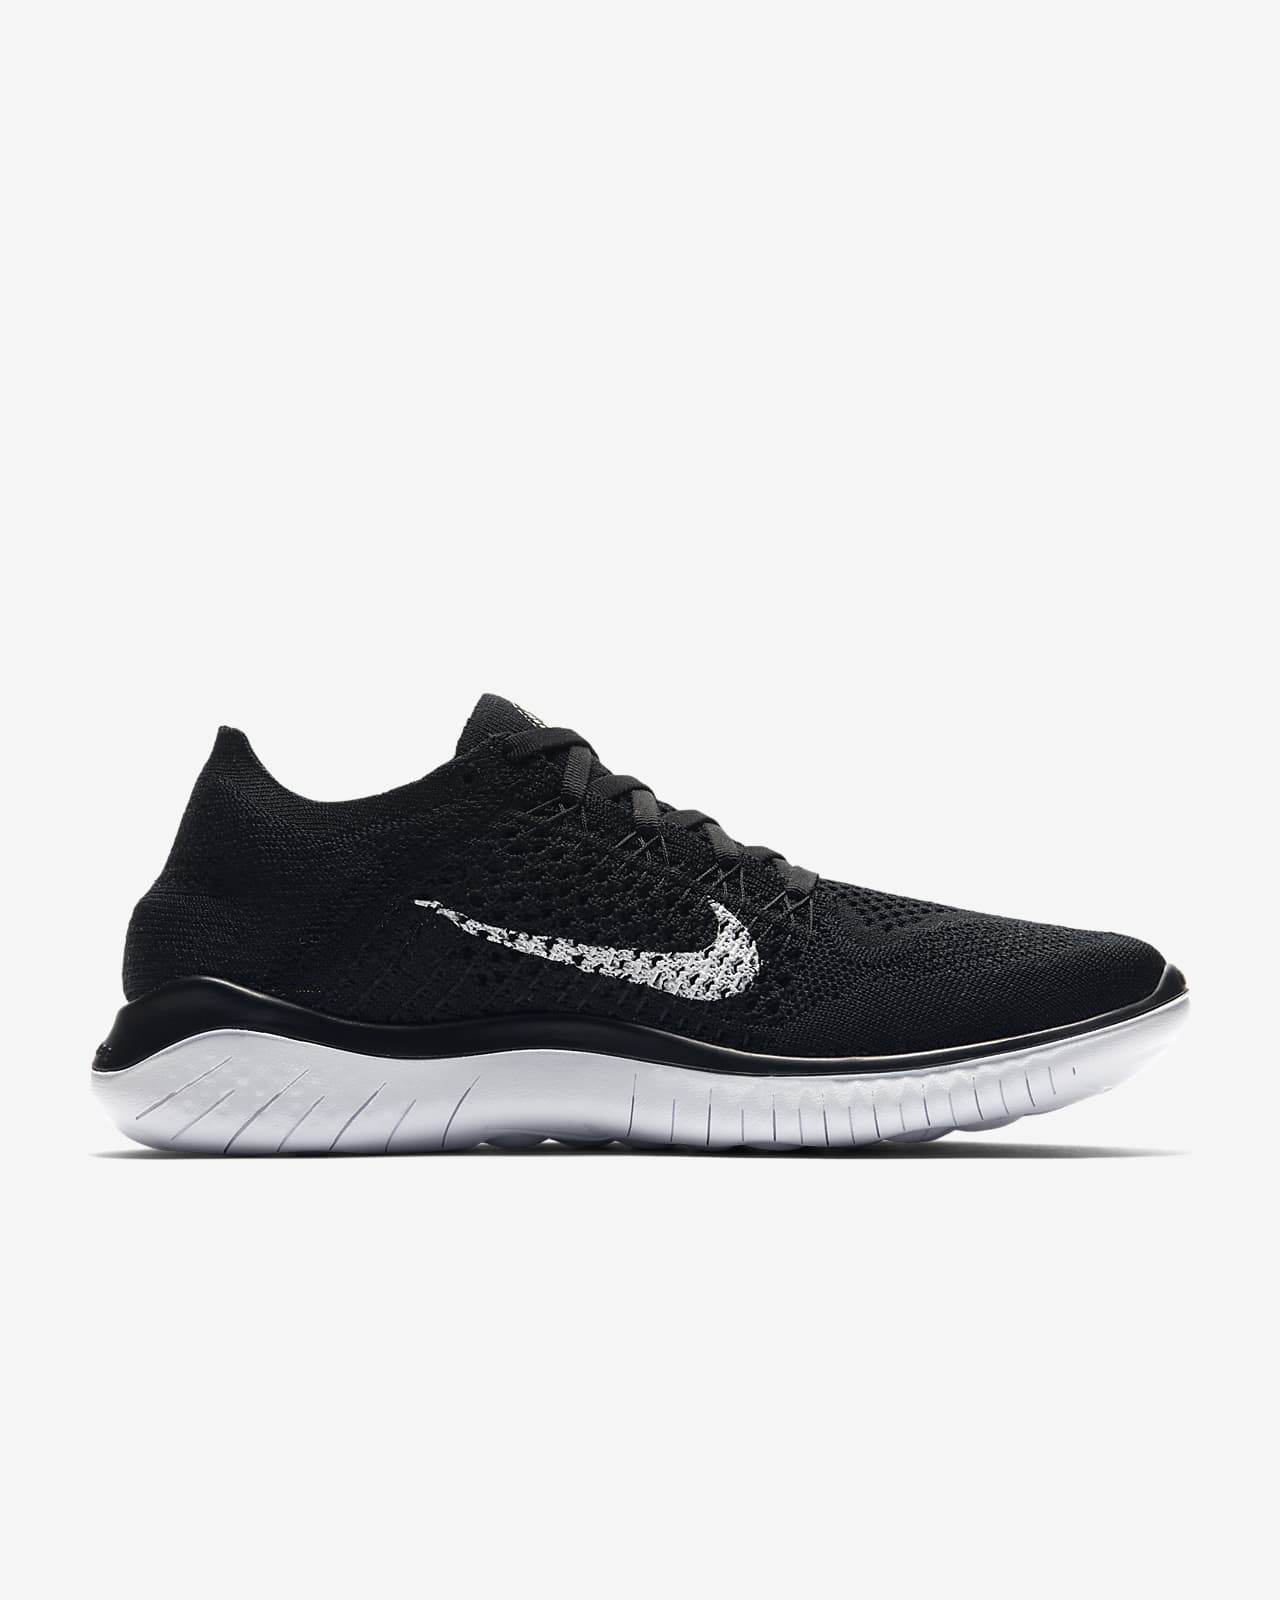 nike flyknit running shoes